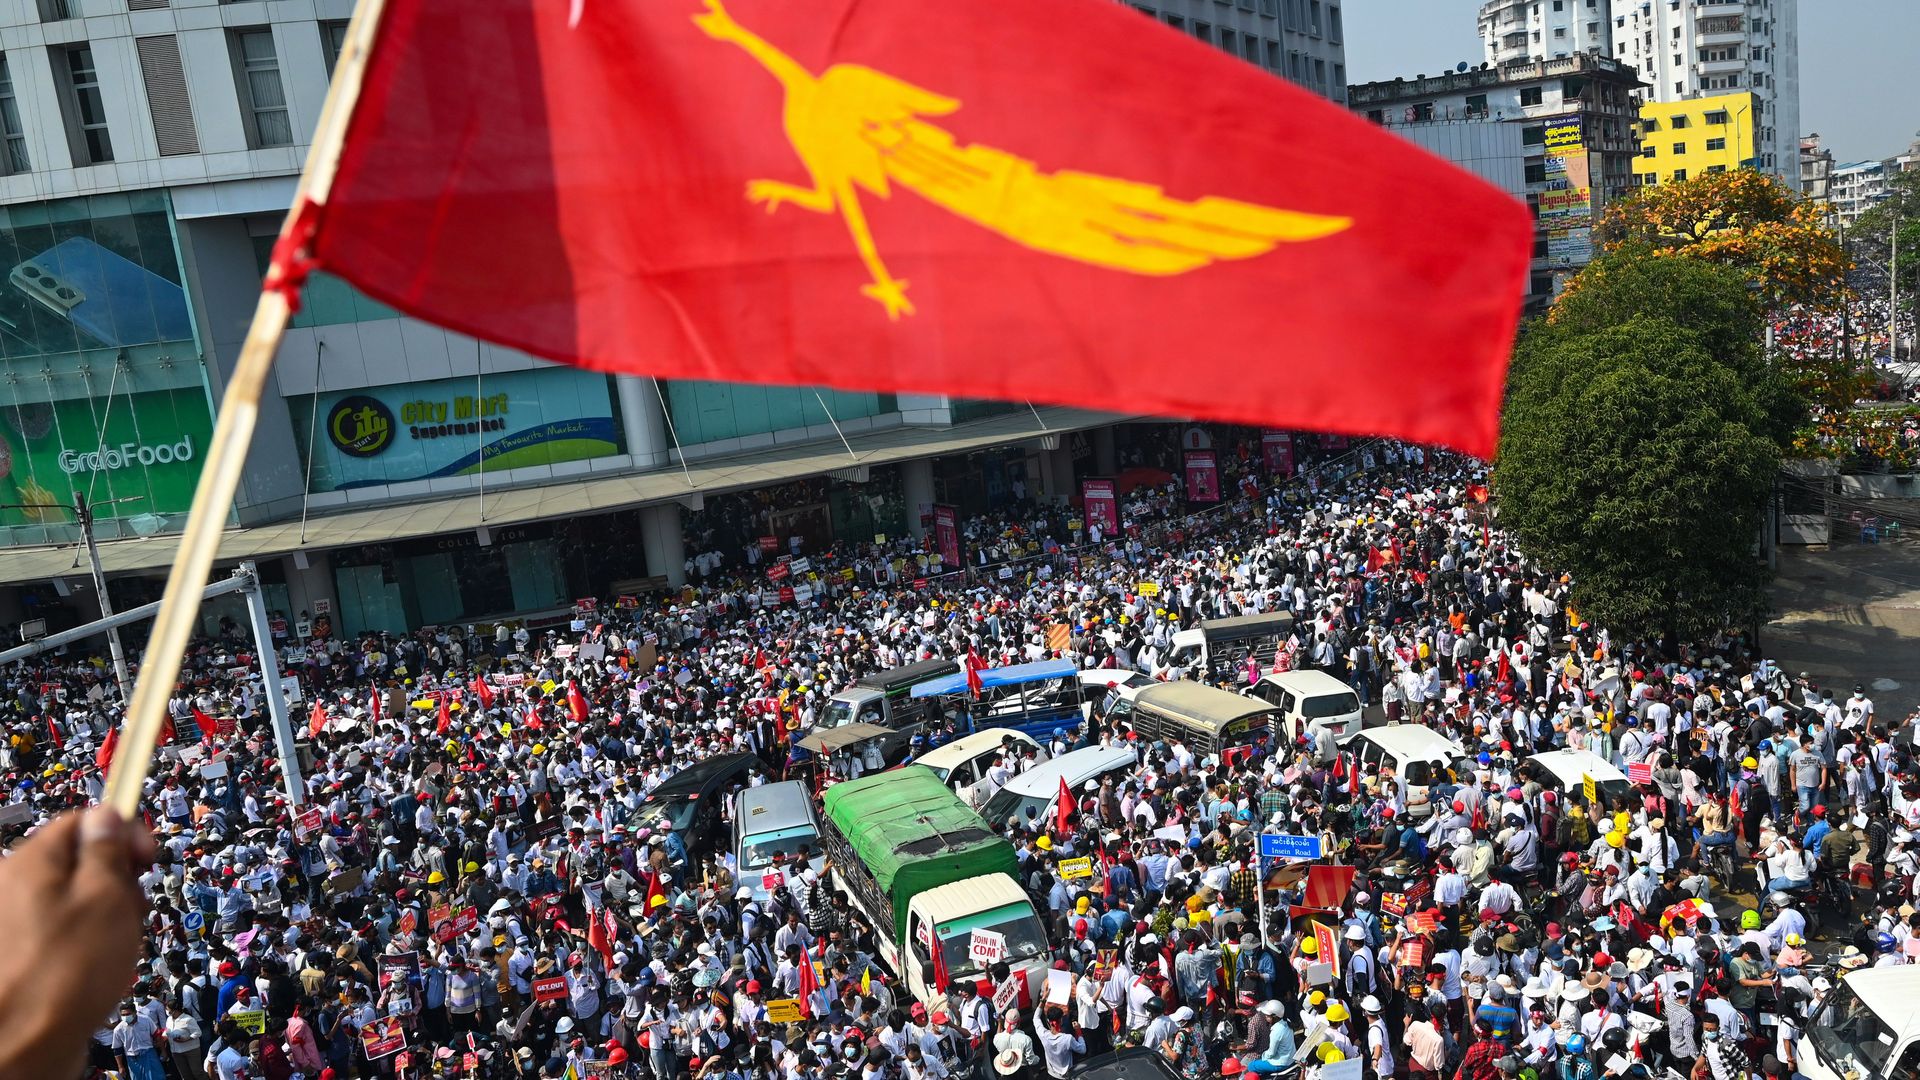  A protester waves the National League for Democracy (NLD) flag while others take part in a demonstration against the military coup in Yangon on February 22